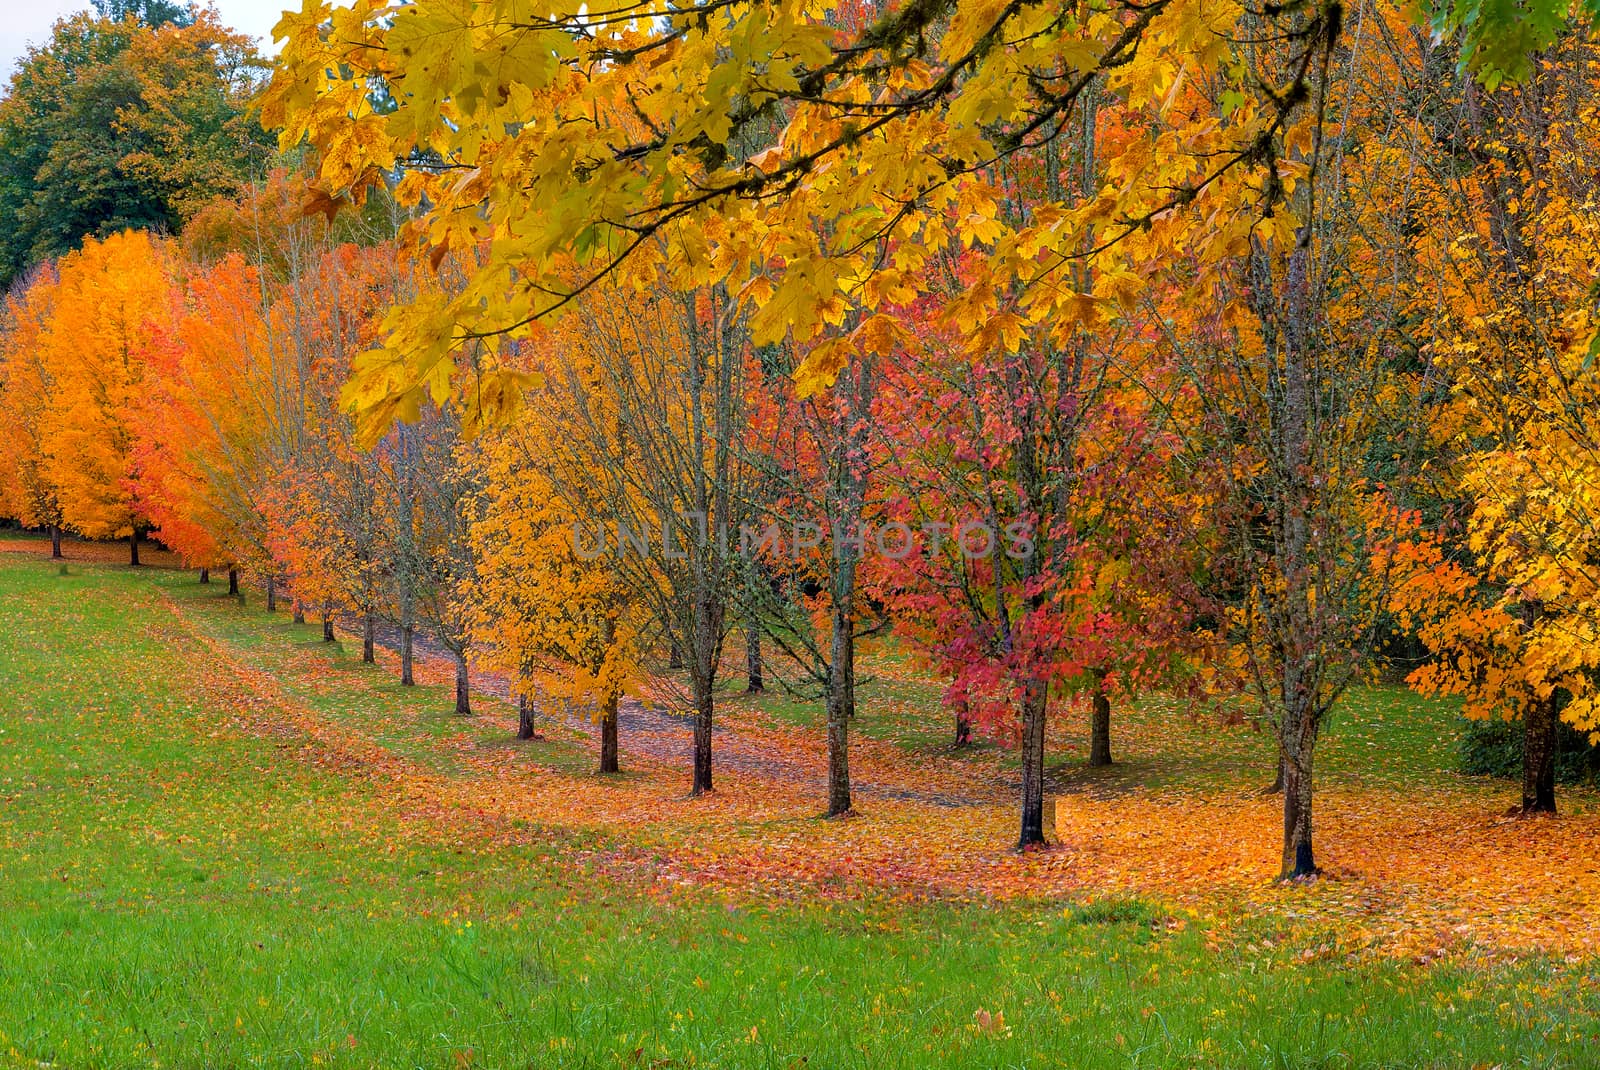 Park with tree lined maple trees in peak fall colors in Oregon